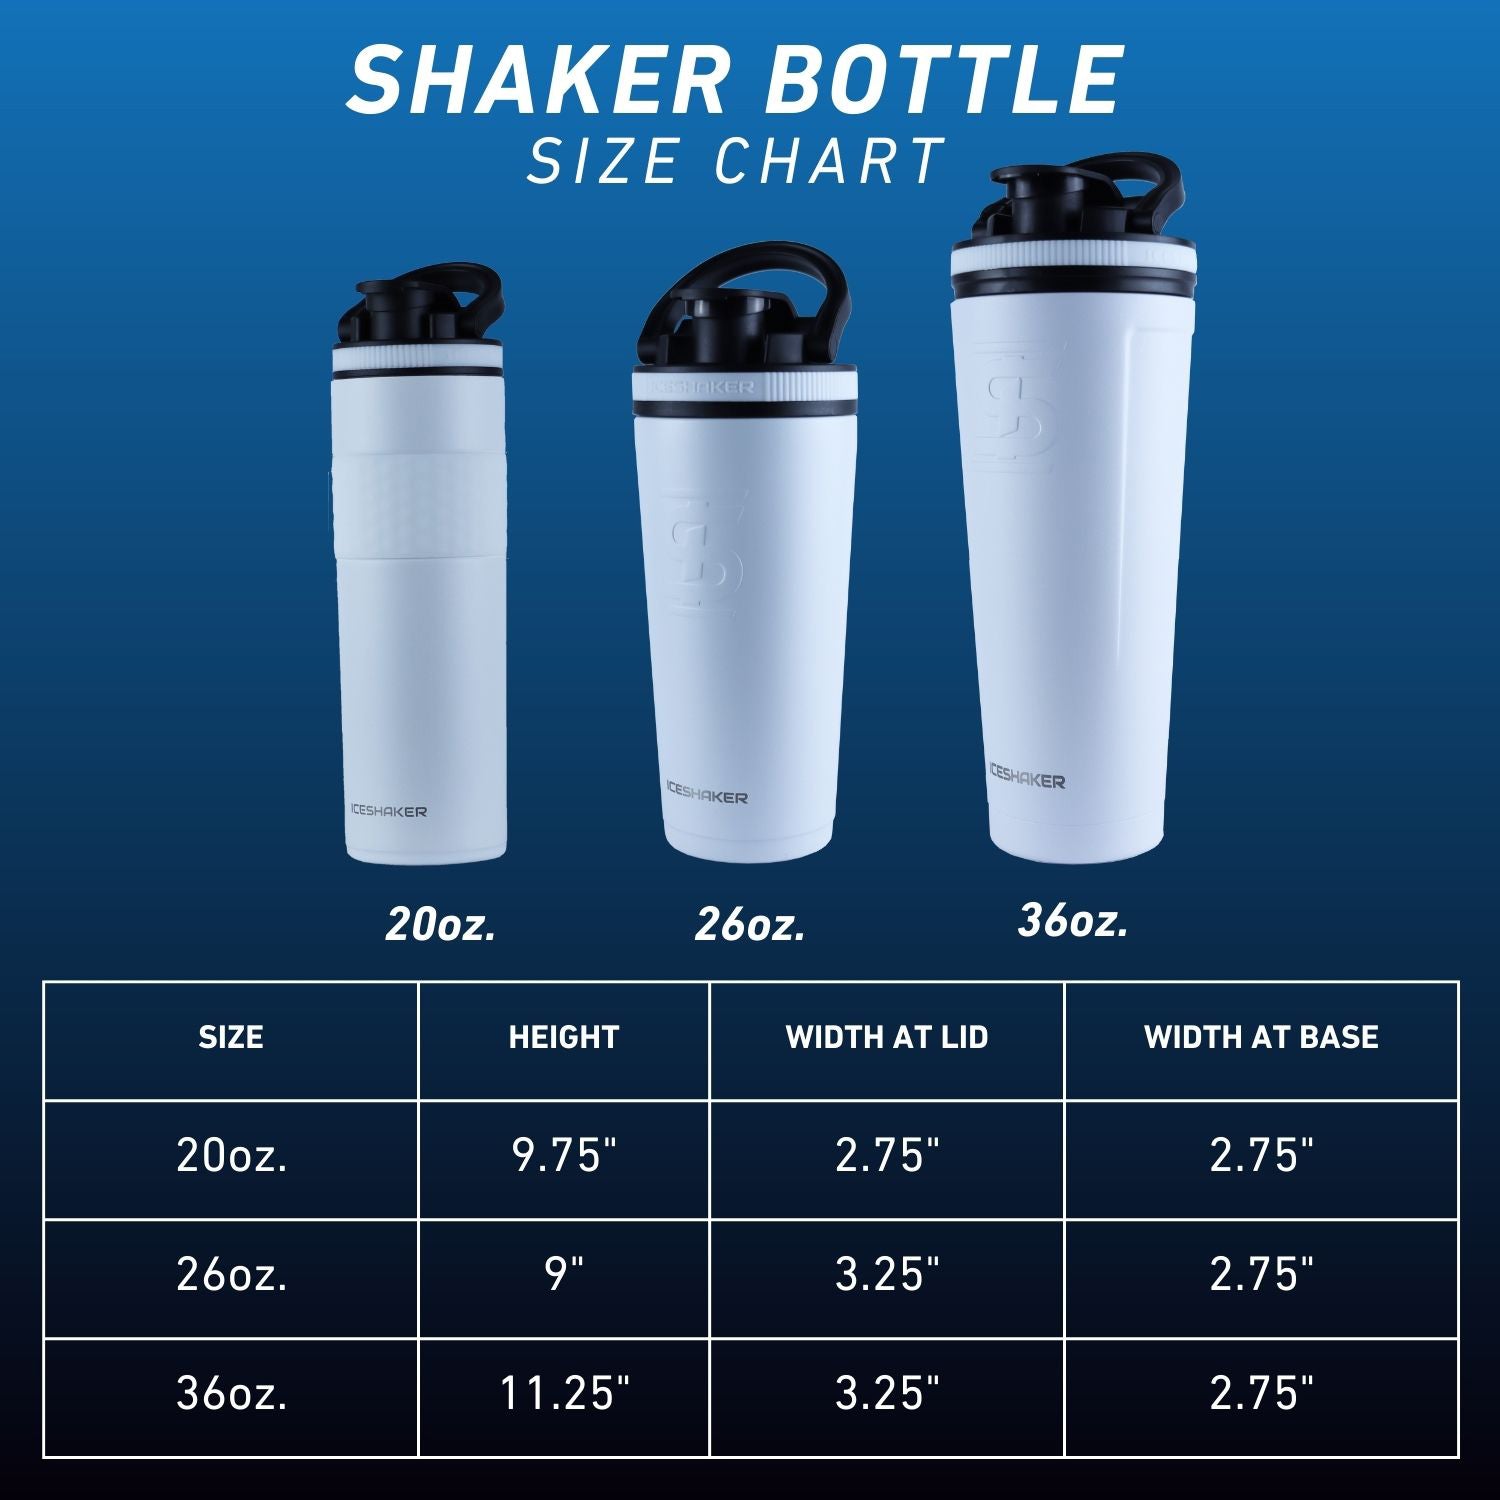 20oz Shaker Bottle Dimensions: Height = 9.75 inches. Width at Lid = 2.75 inches. Width at Base = 2.75 inches. 26oz Shaker Bottle Dimensions: Height = 9 inches. Width at Lid = 3.25 inches. Width at Base = 2.75 inches. 36oz Shaker Bottle Dimensions: Height = 11.25 inches. Width at Lid = 3.25 inches. Width at Base = 2.75 inches